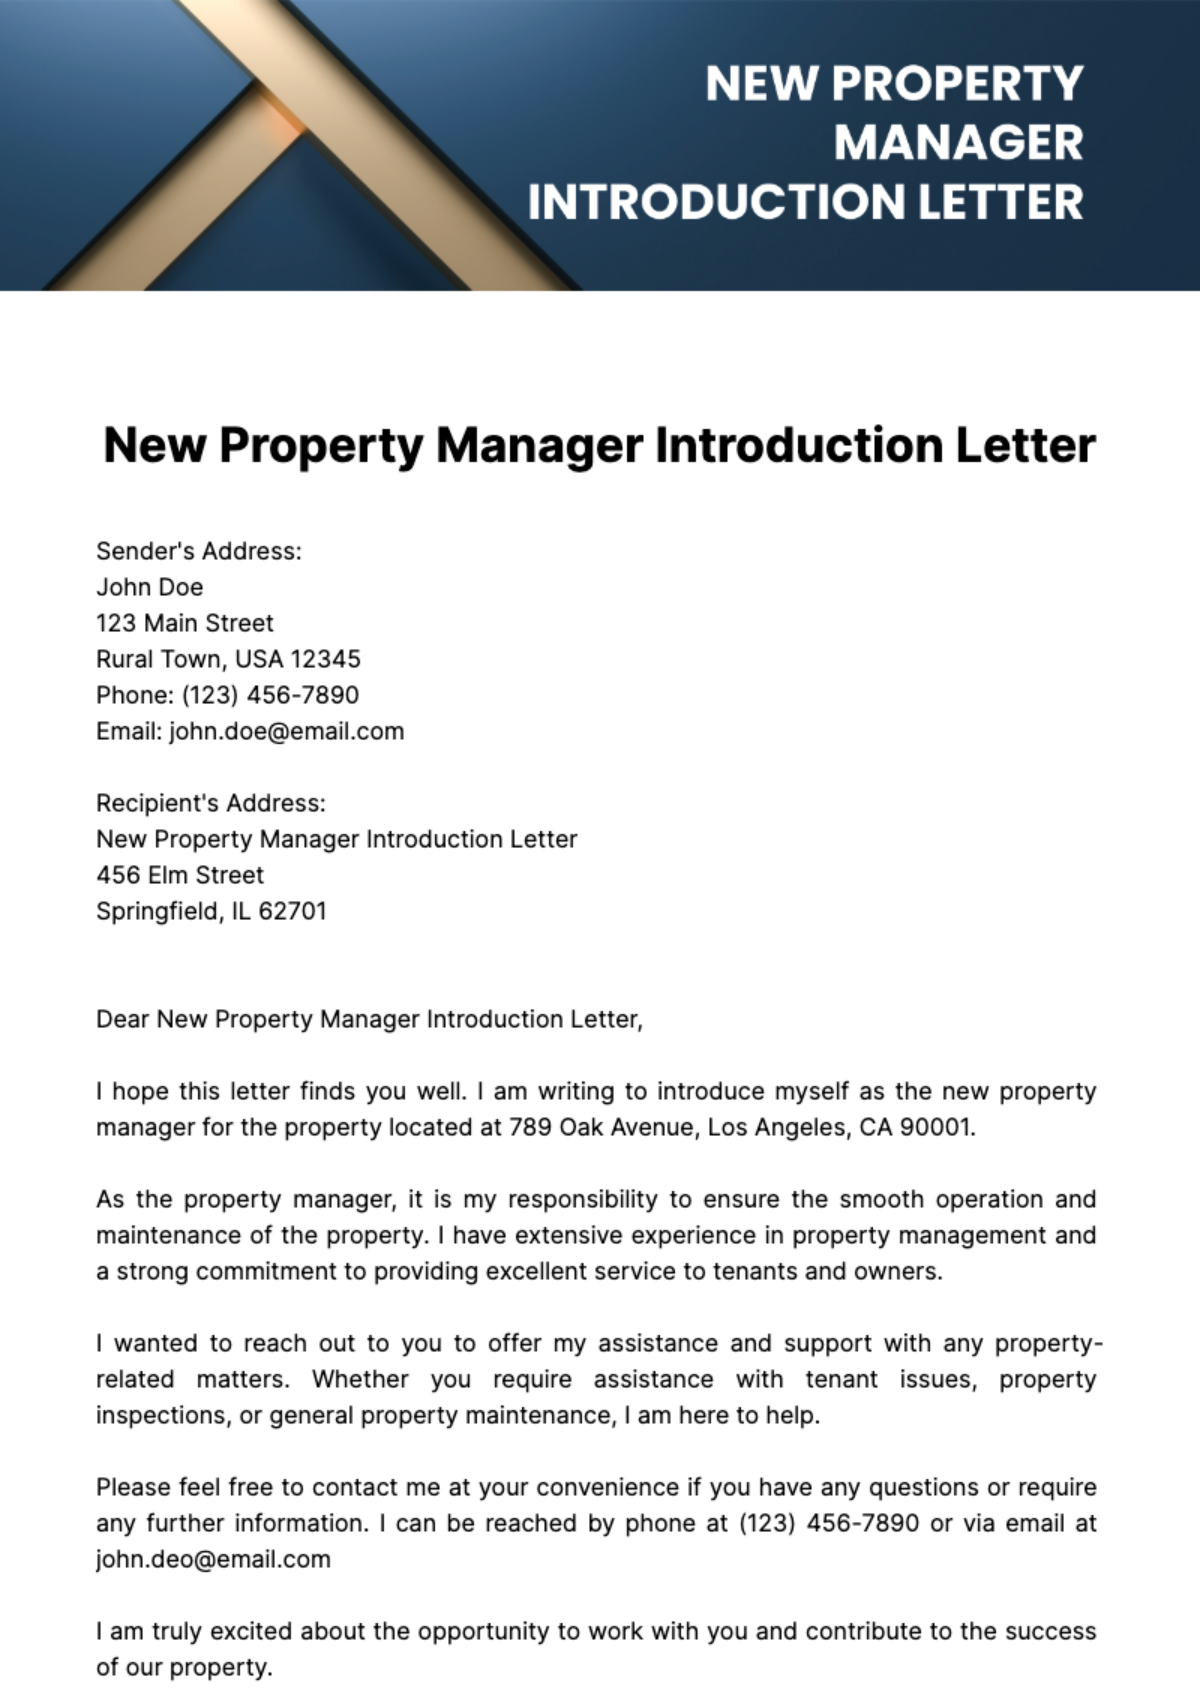 New Property Manager Introduction Letter Template